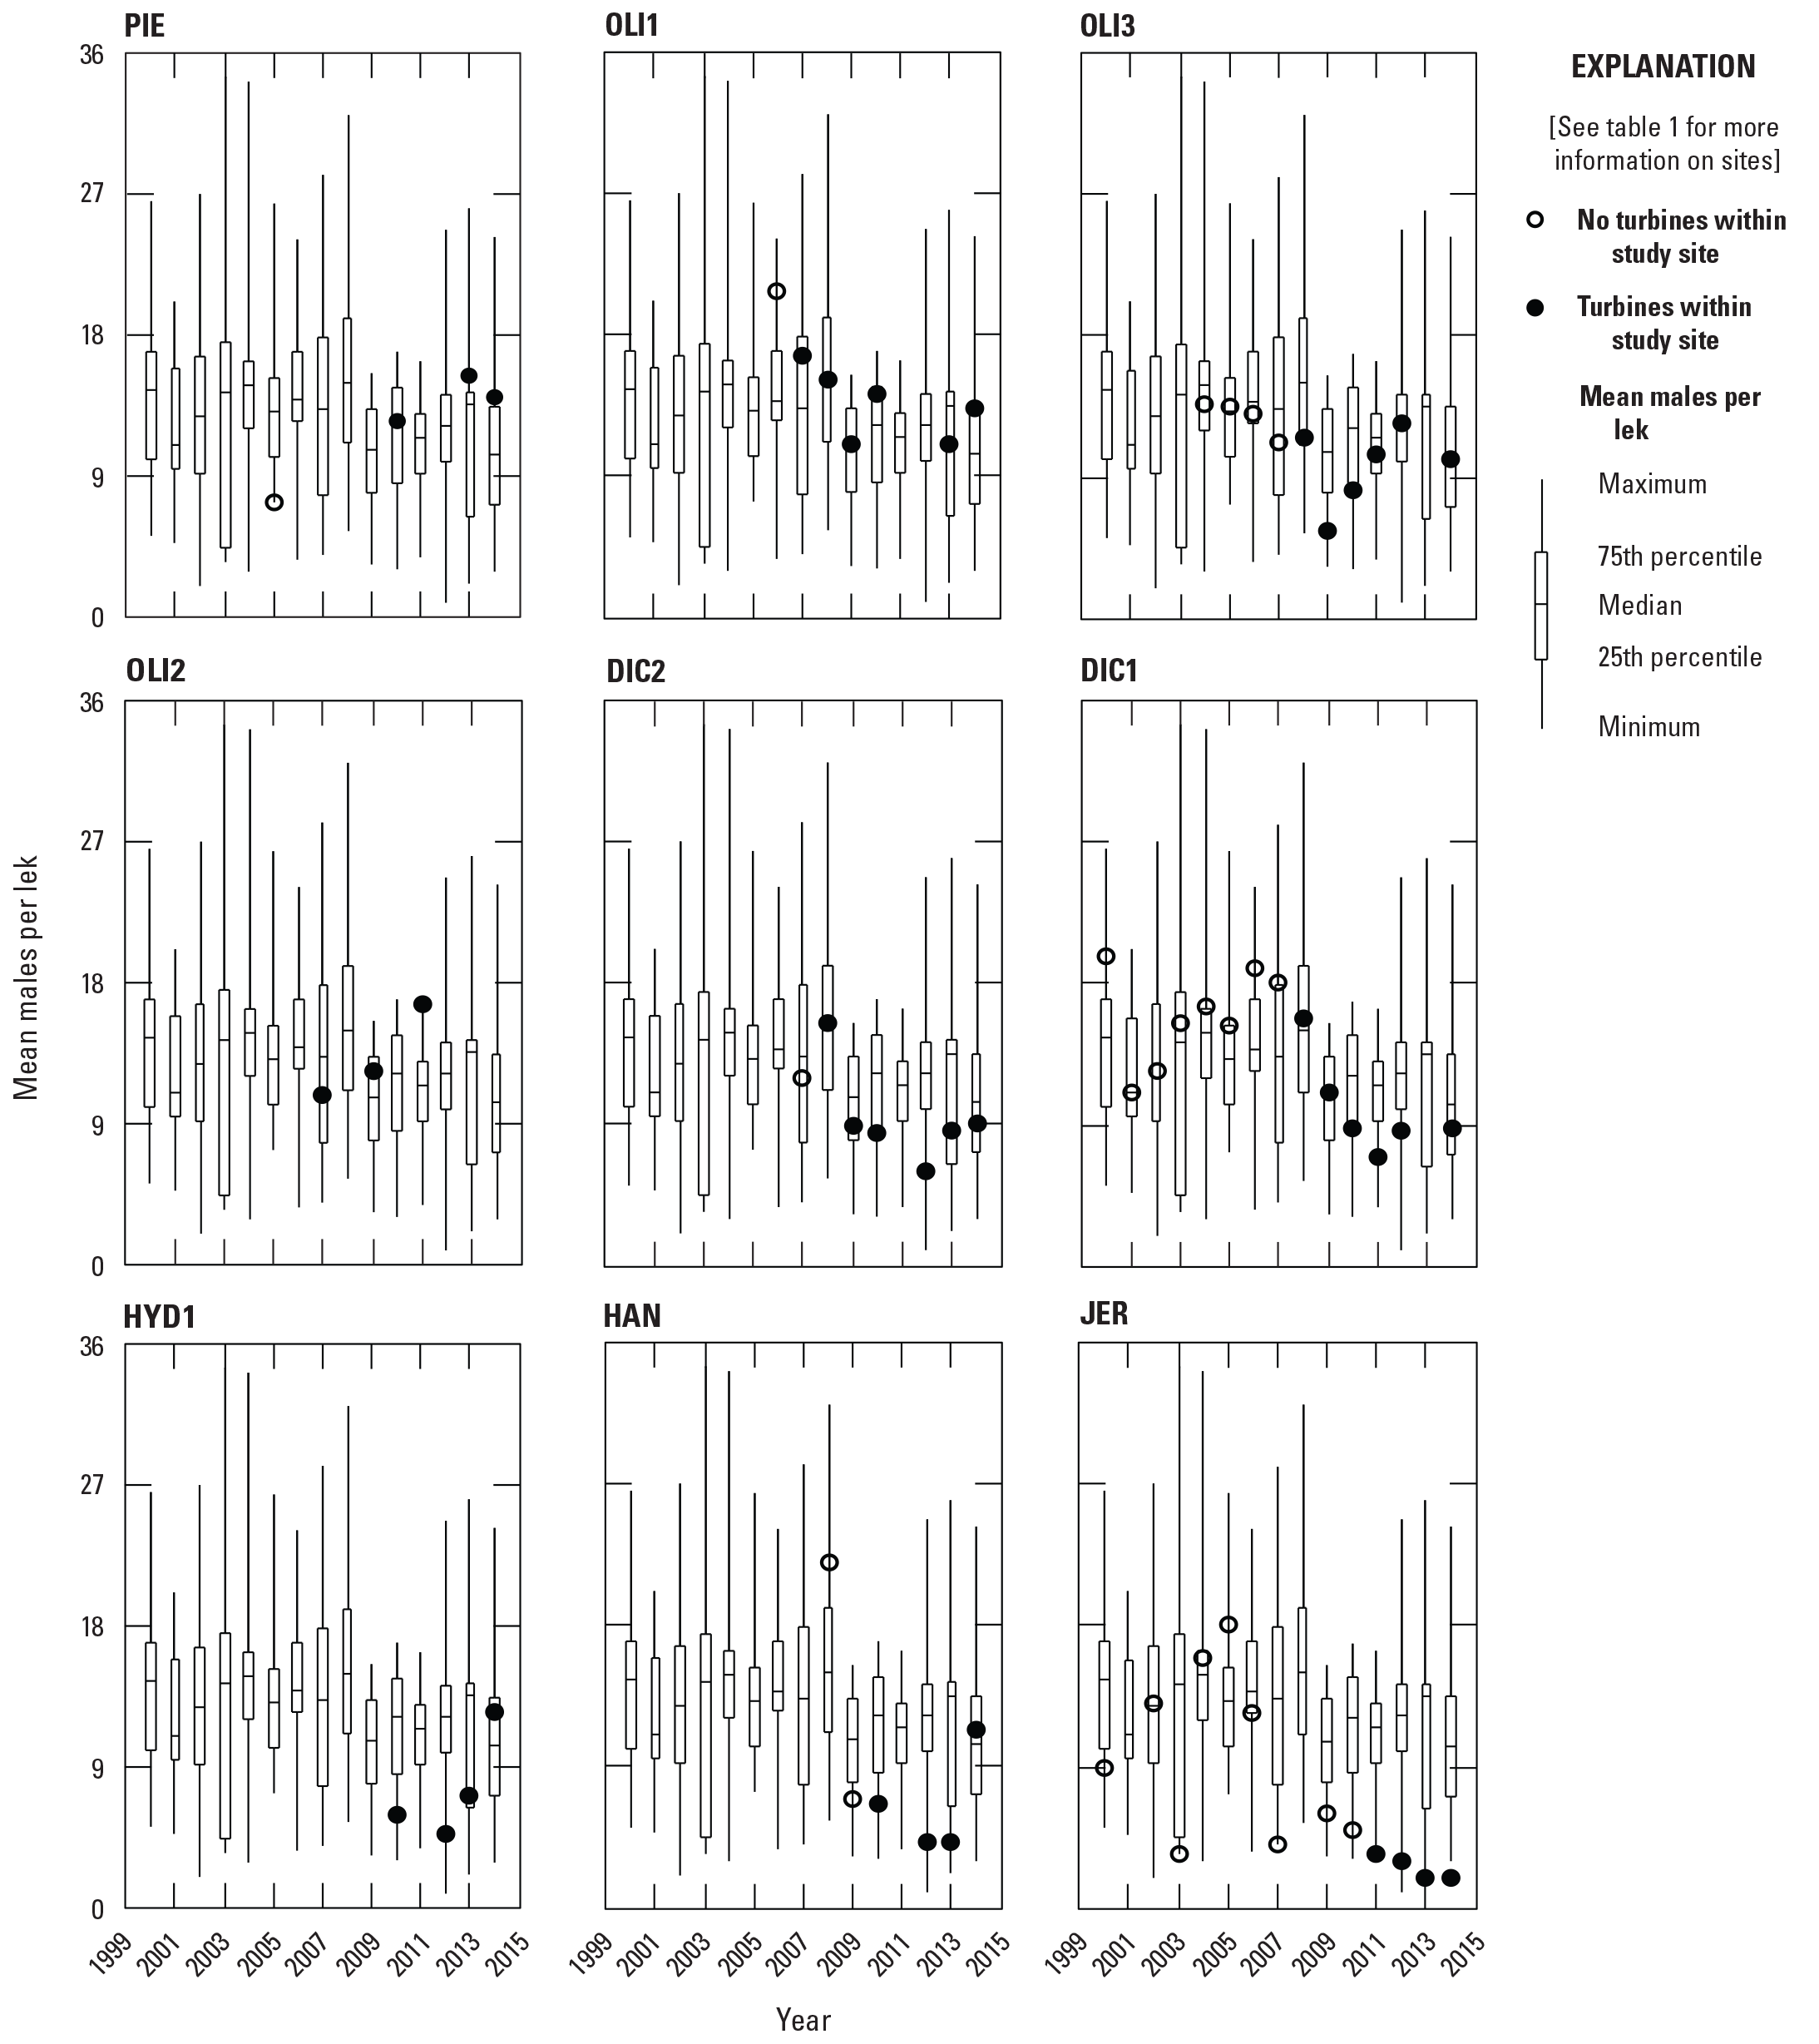 Mean number male grouse per lek for nine study sites with wind turbines, North Dakota
                        and South Dakota, 2000–14